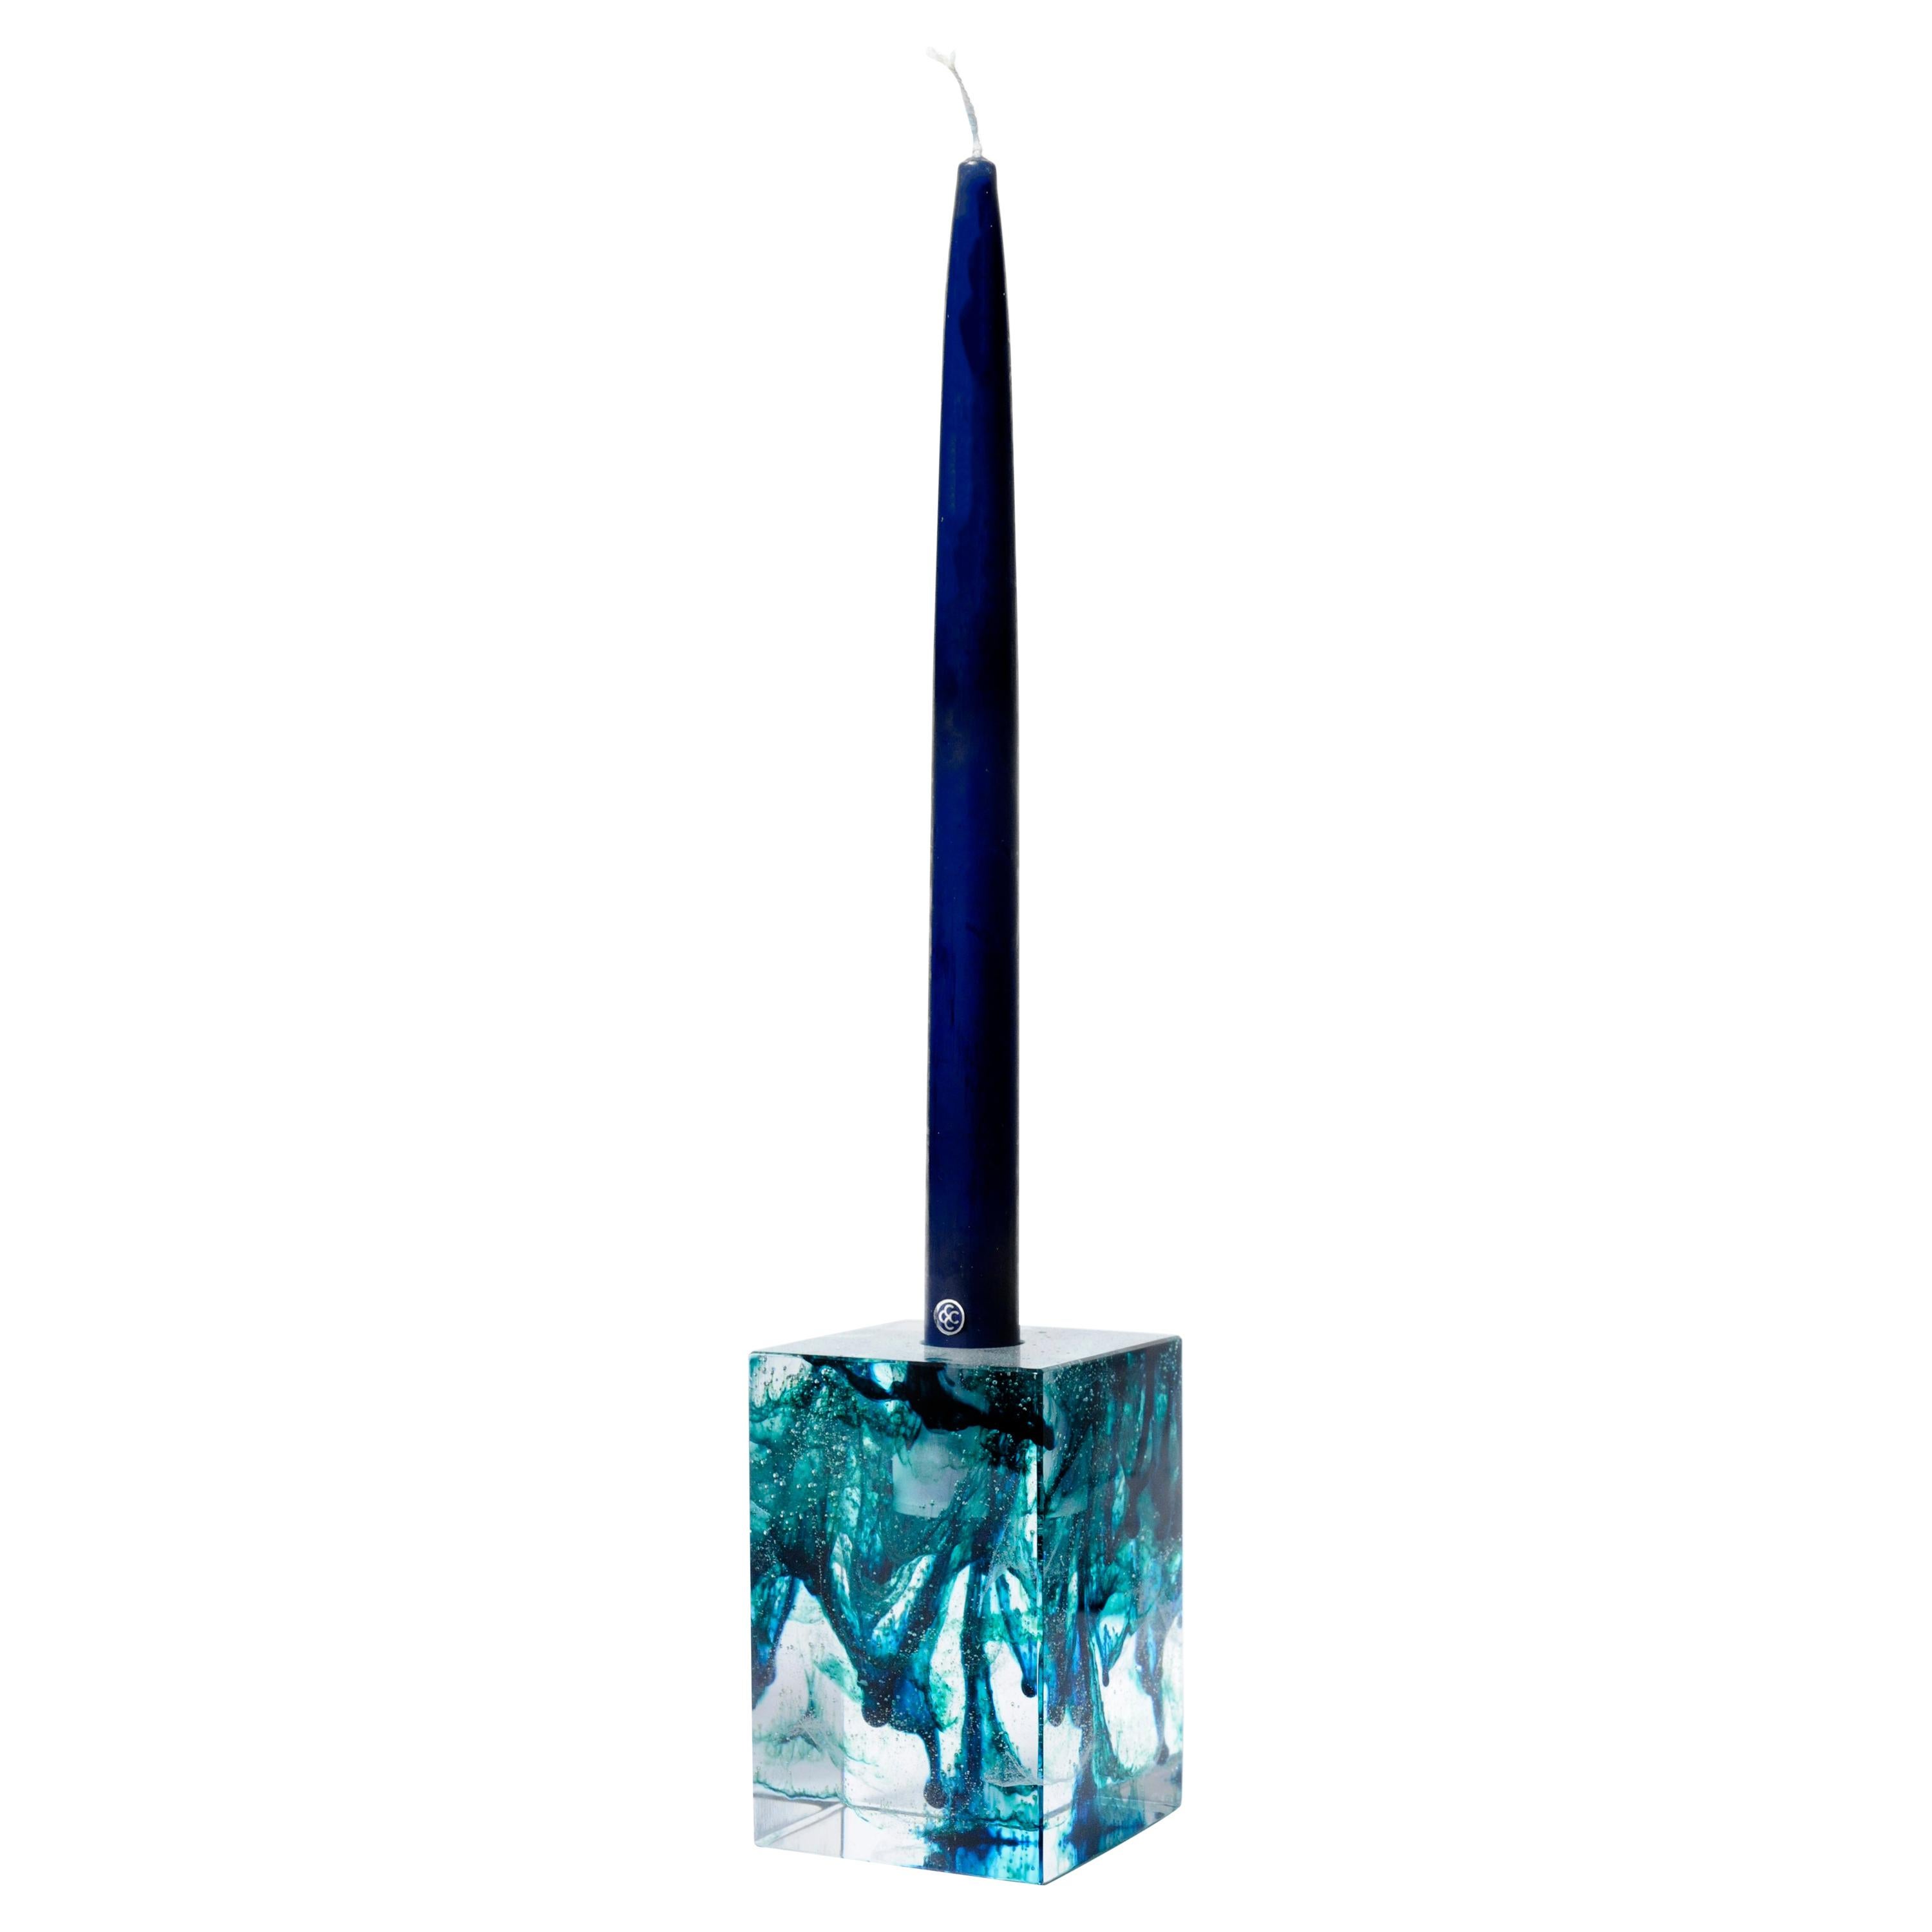 Kandlstx Colored Glass Candle Holder Square